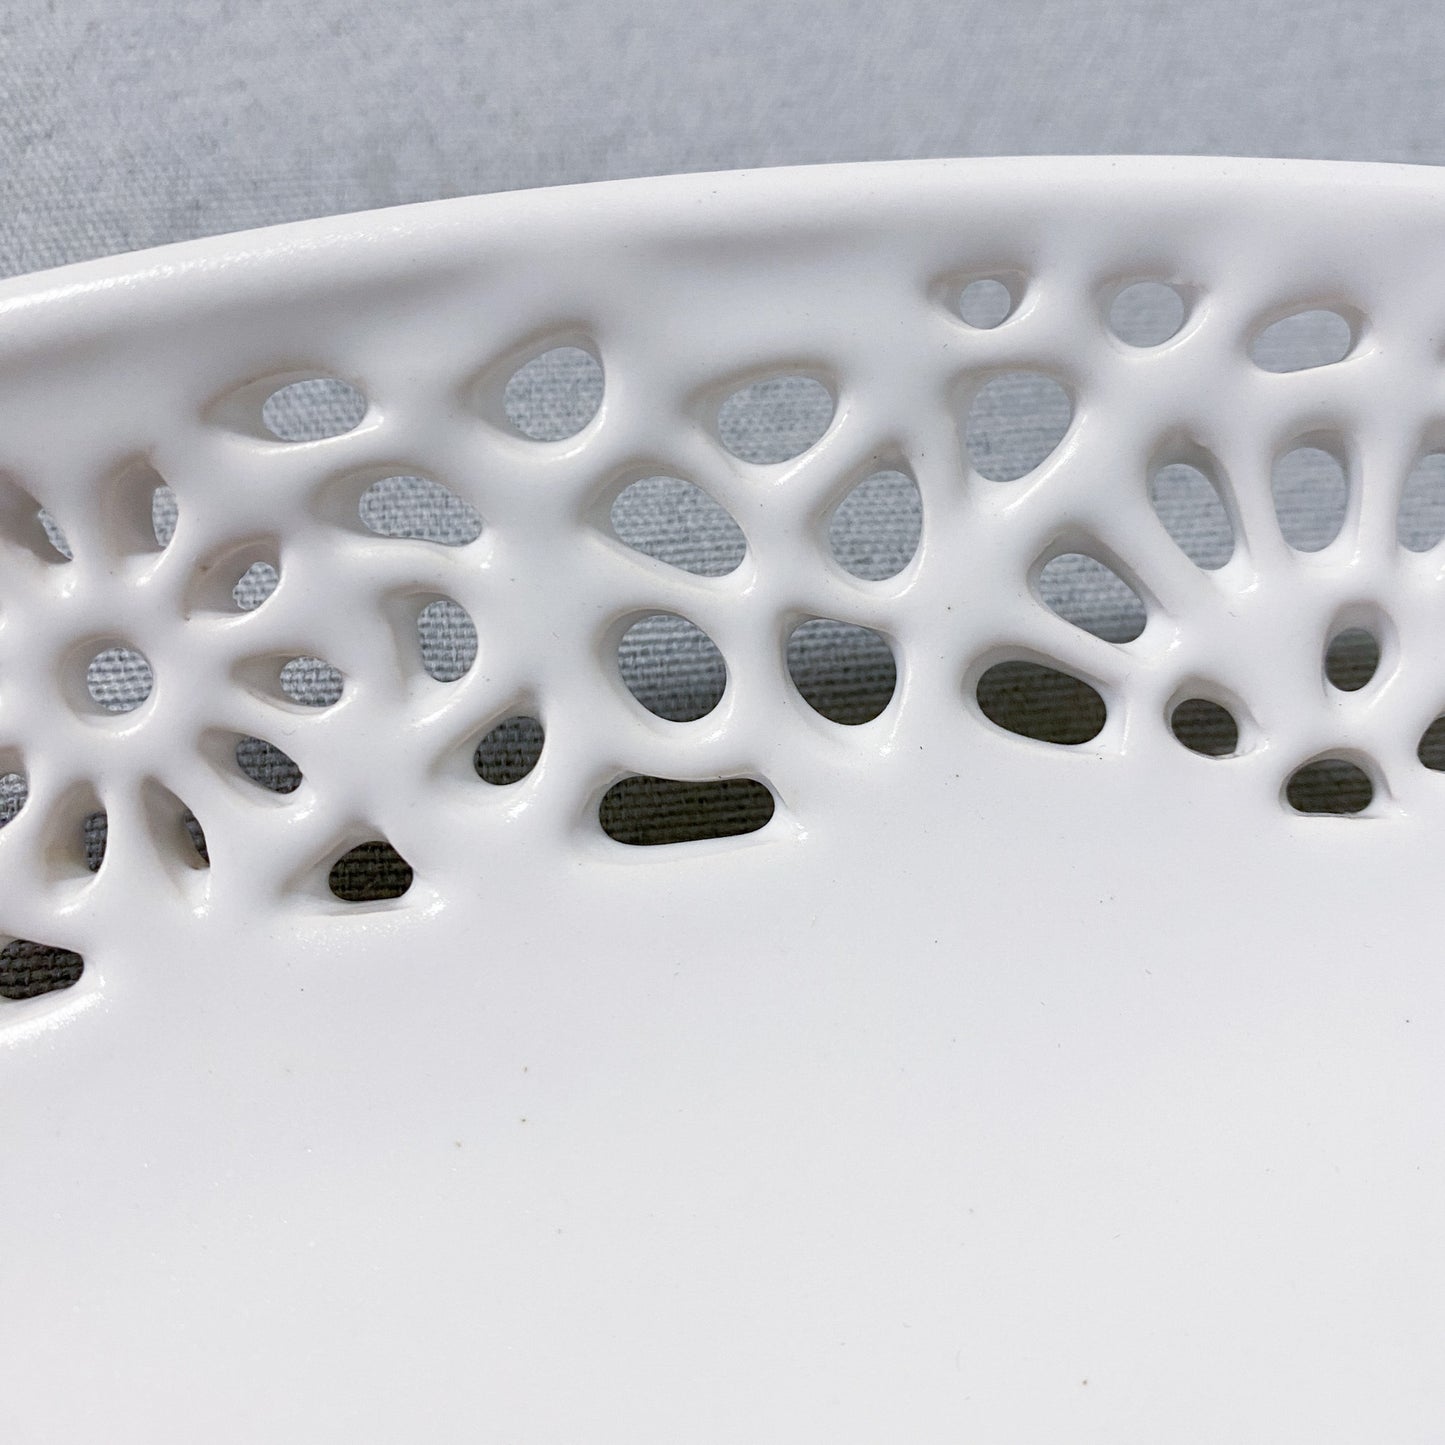 White Serving Plate